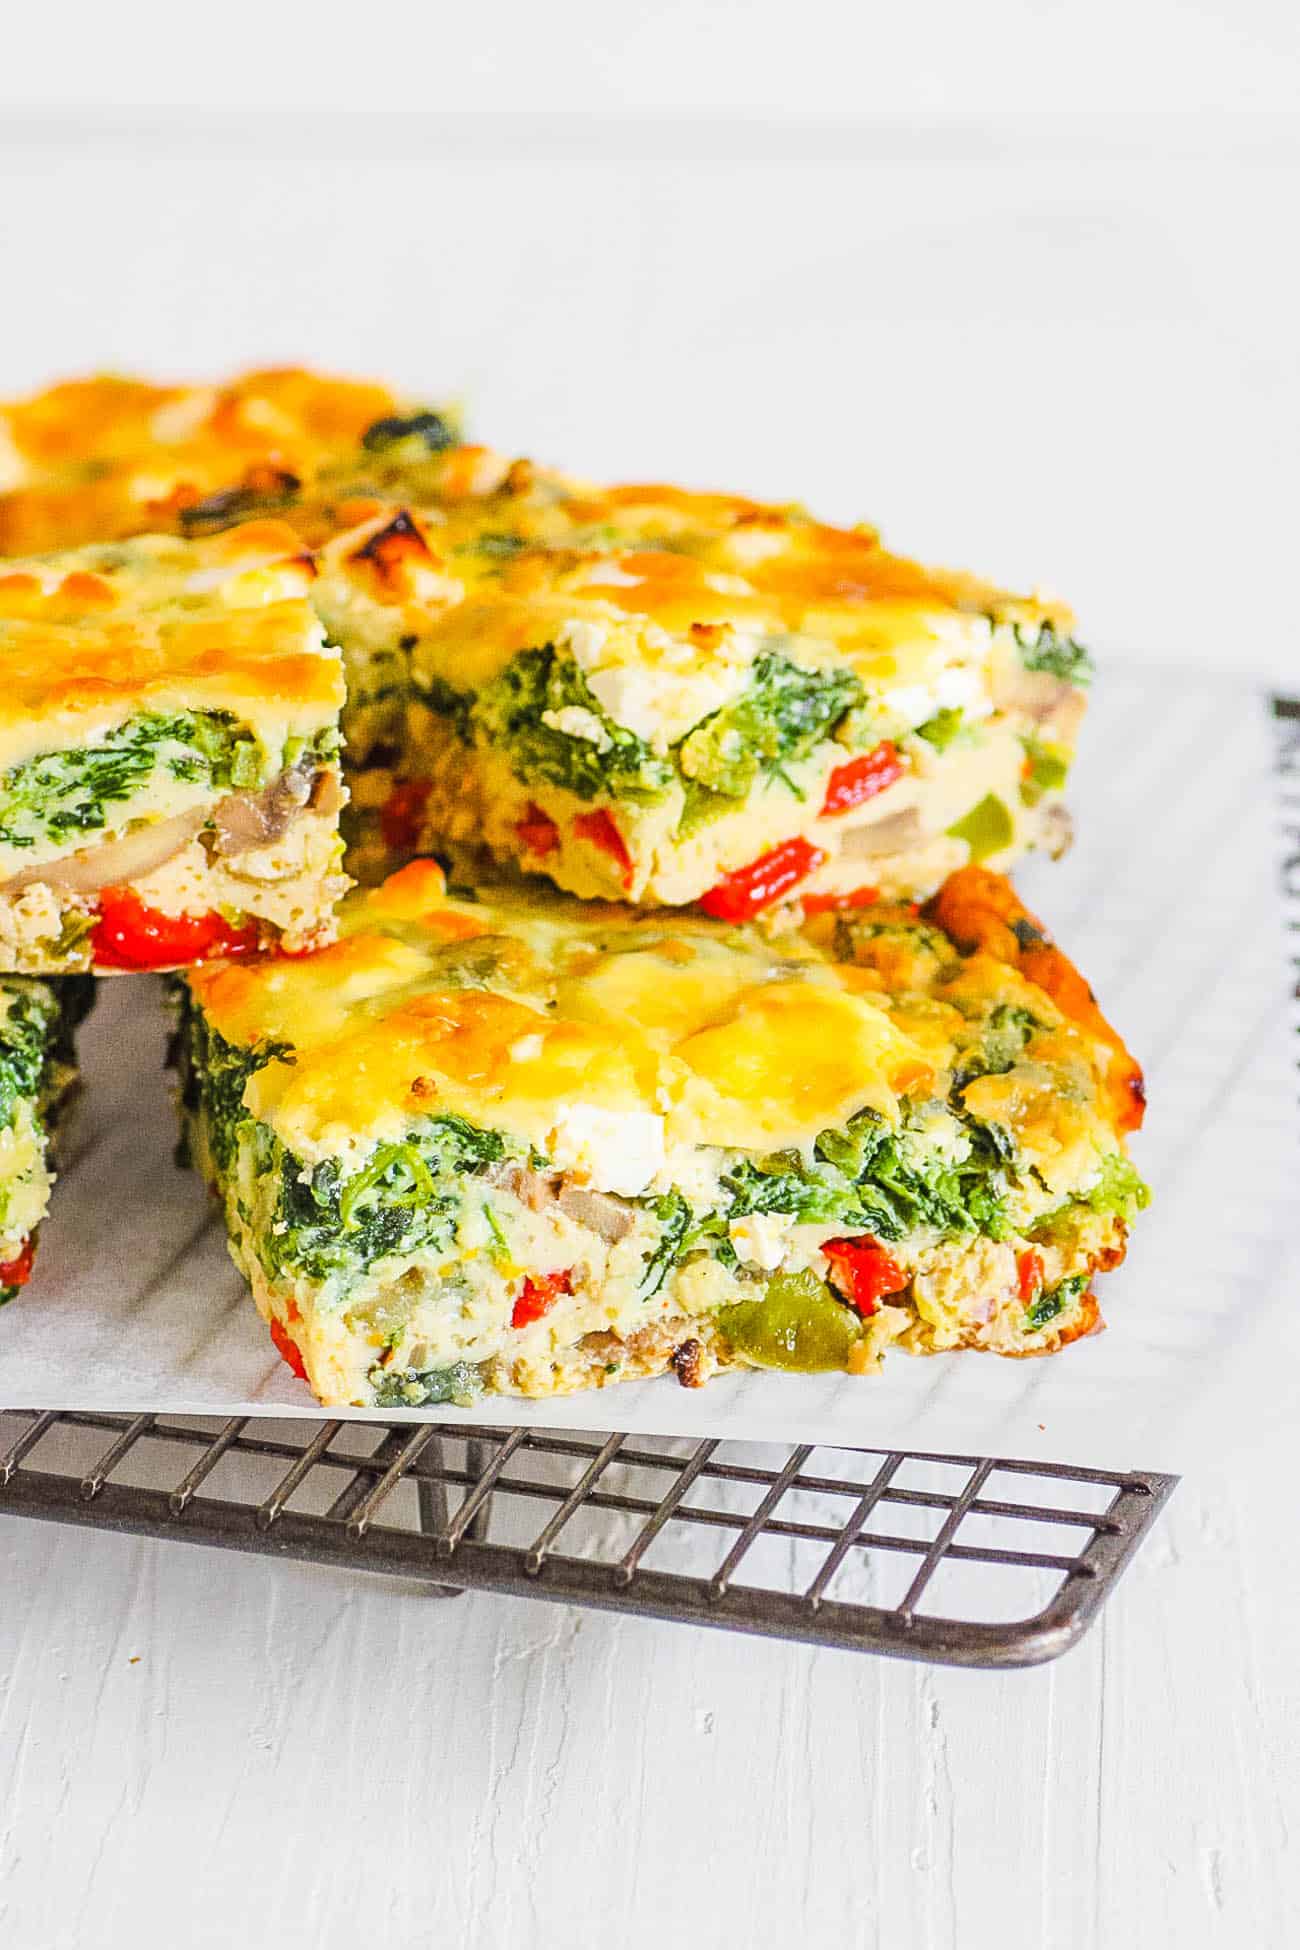 easy healthy low carb breakfast casserole recipe sliced into cubes